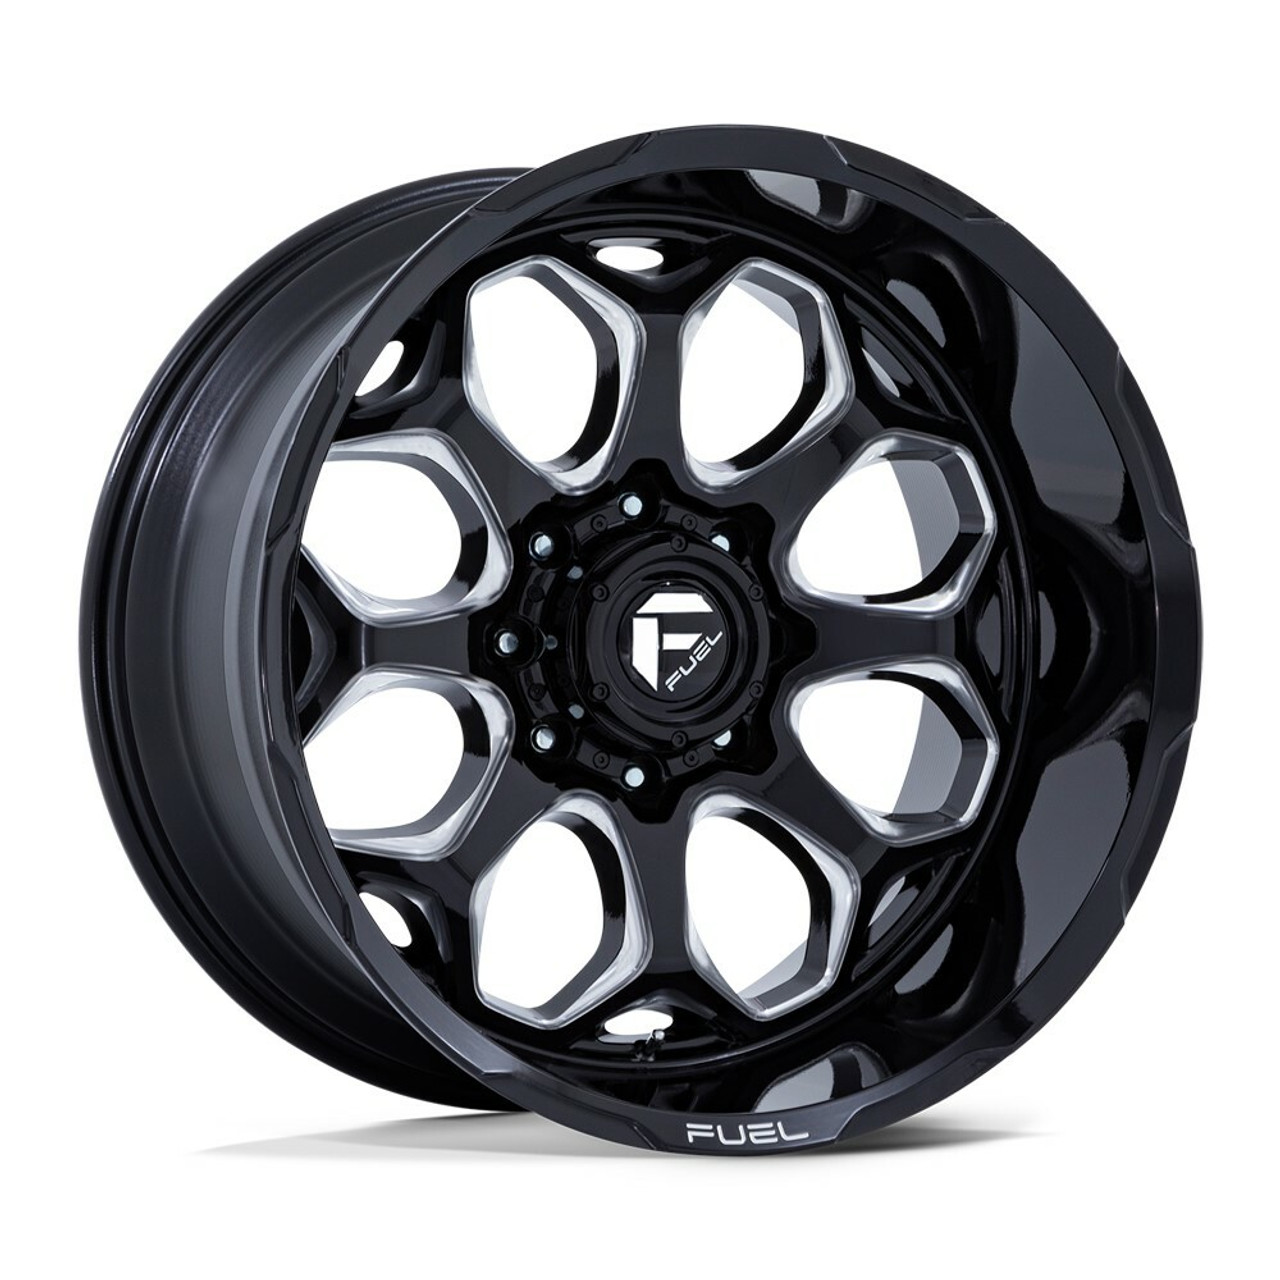 Set 4 Fuel FC862 Scepter 20x10 6x5.5 Gloss Black Milled 20" -18mm Lifted Wheels